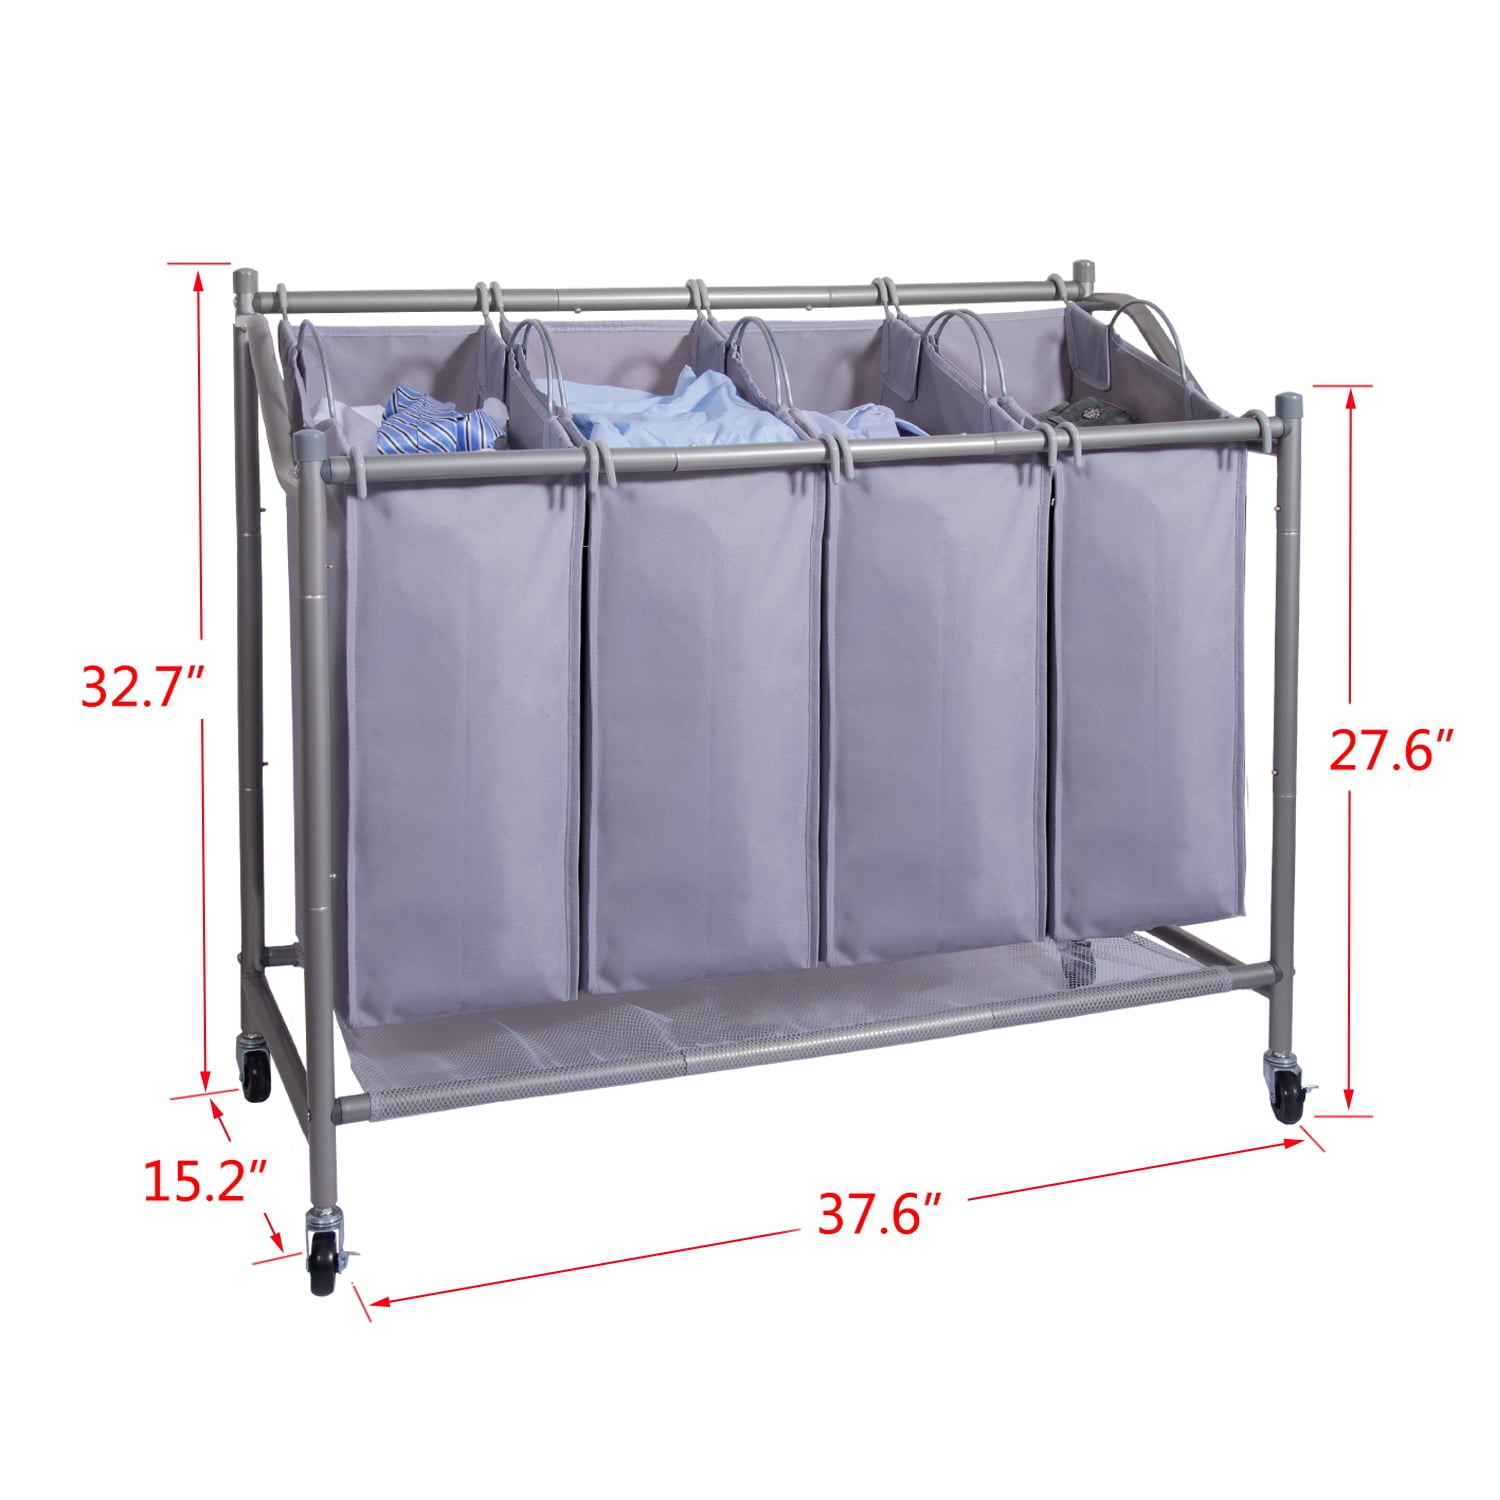 Mllieroo Heavy-Duty 4-Bag Rolling Laundry Sorter Storage Cart with Wheels chrome 